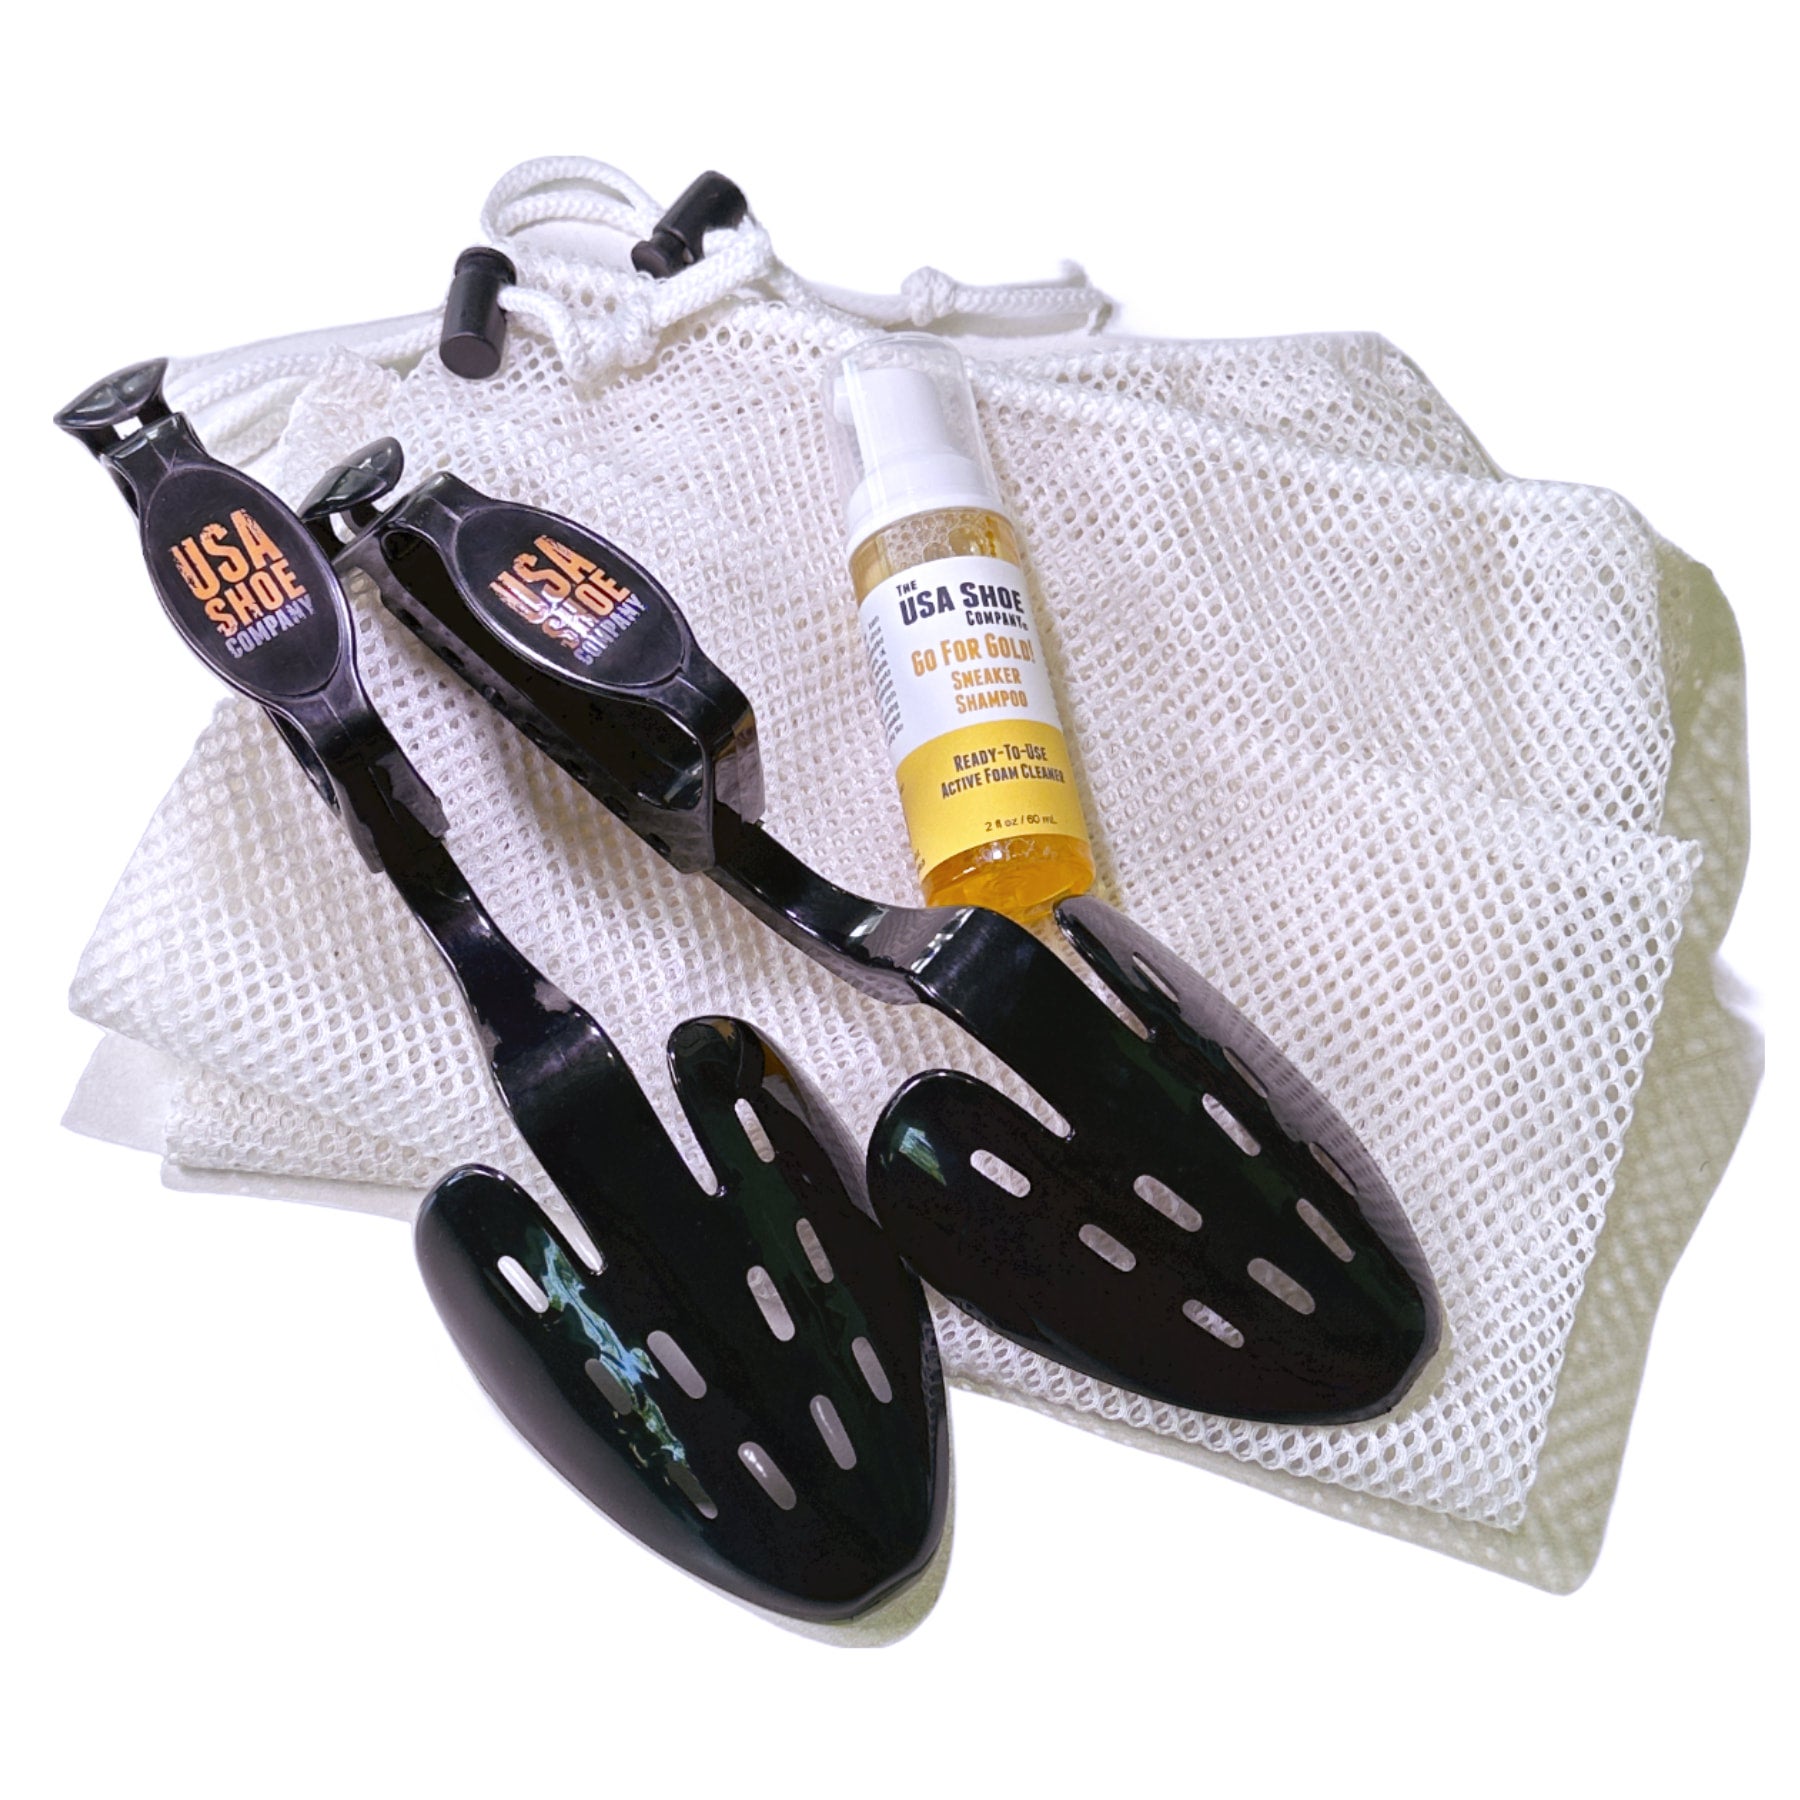 USA Shoe Wash Cleaning Kits  Shoe Service Solutions: Repair, Refinish,  Renew - The USA Shoe Company